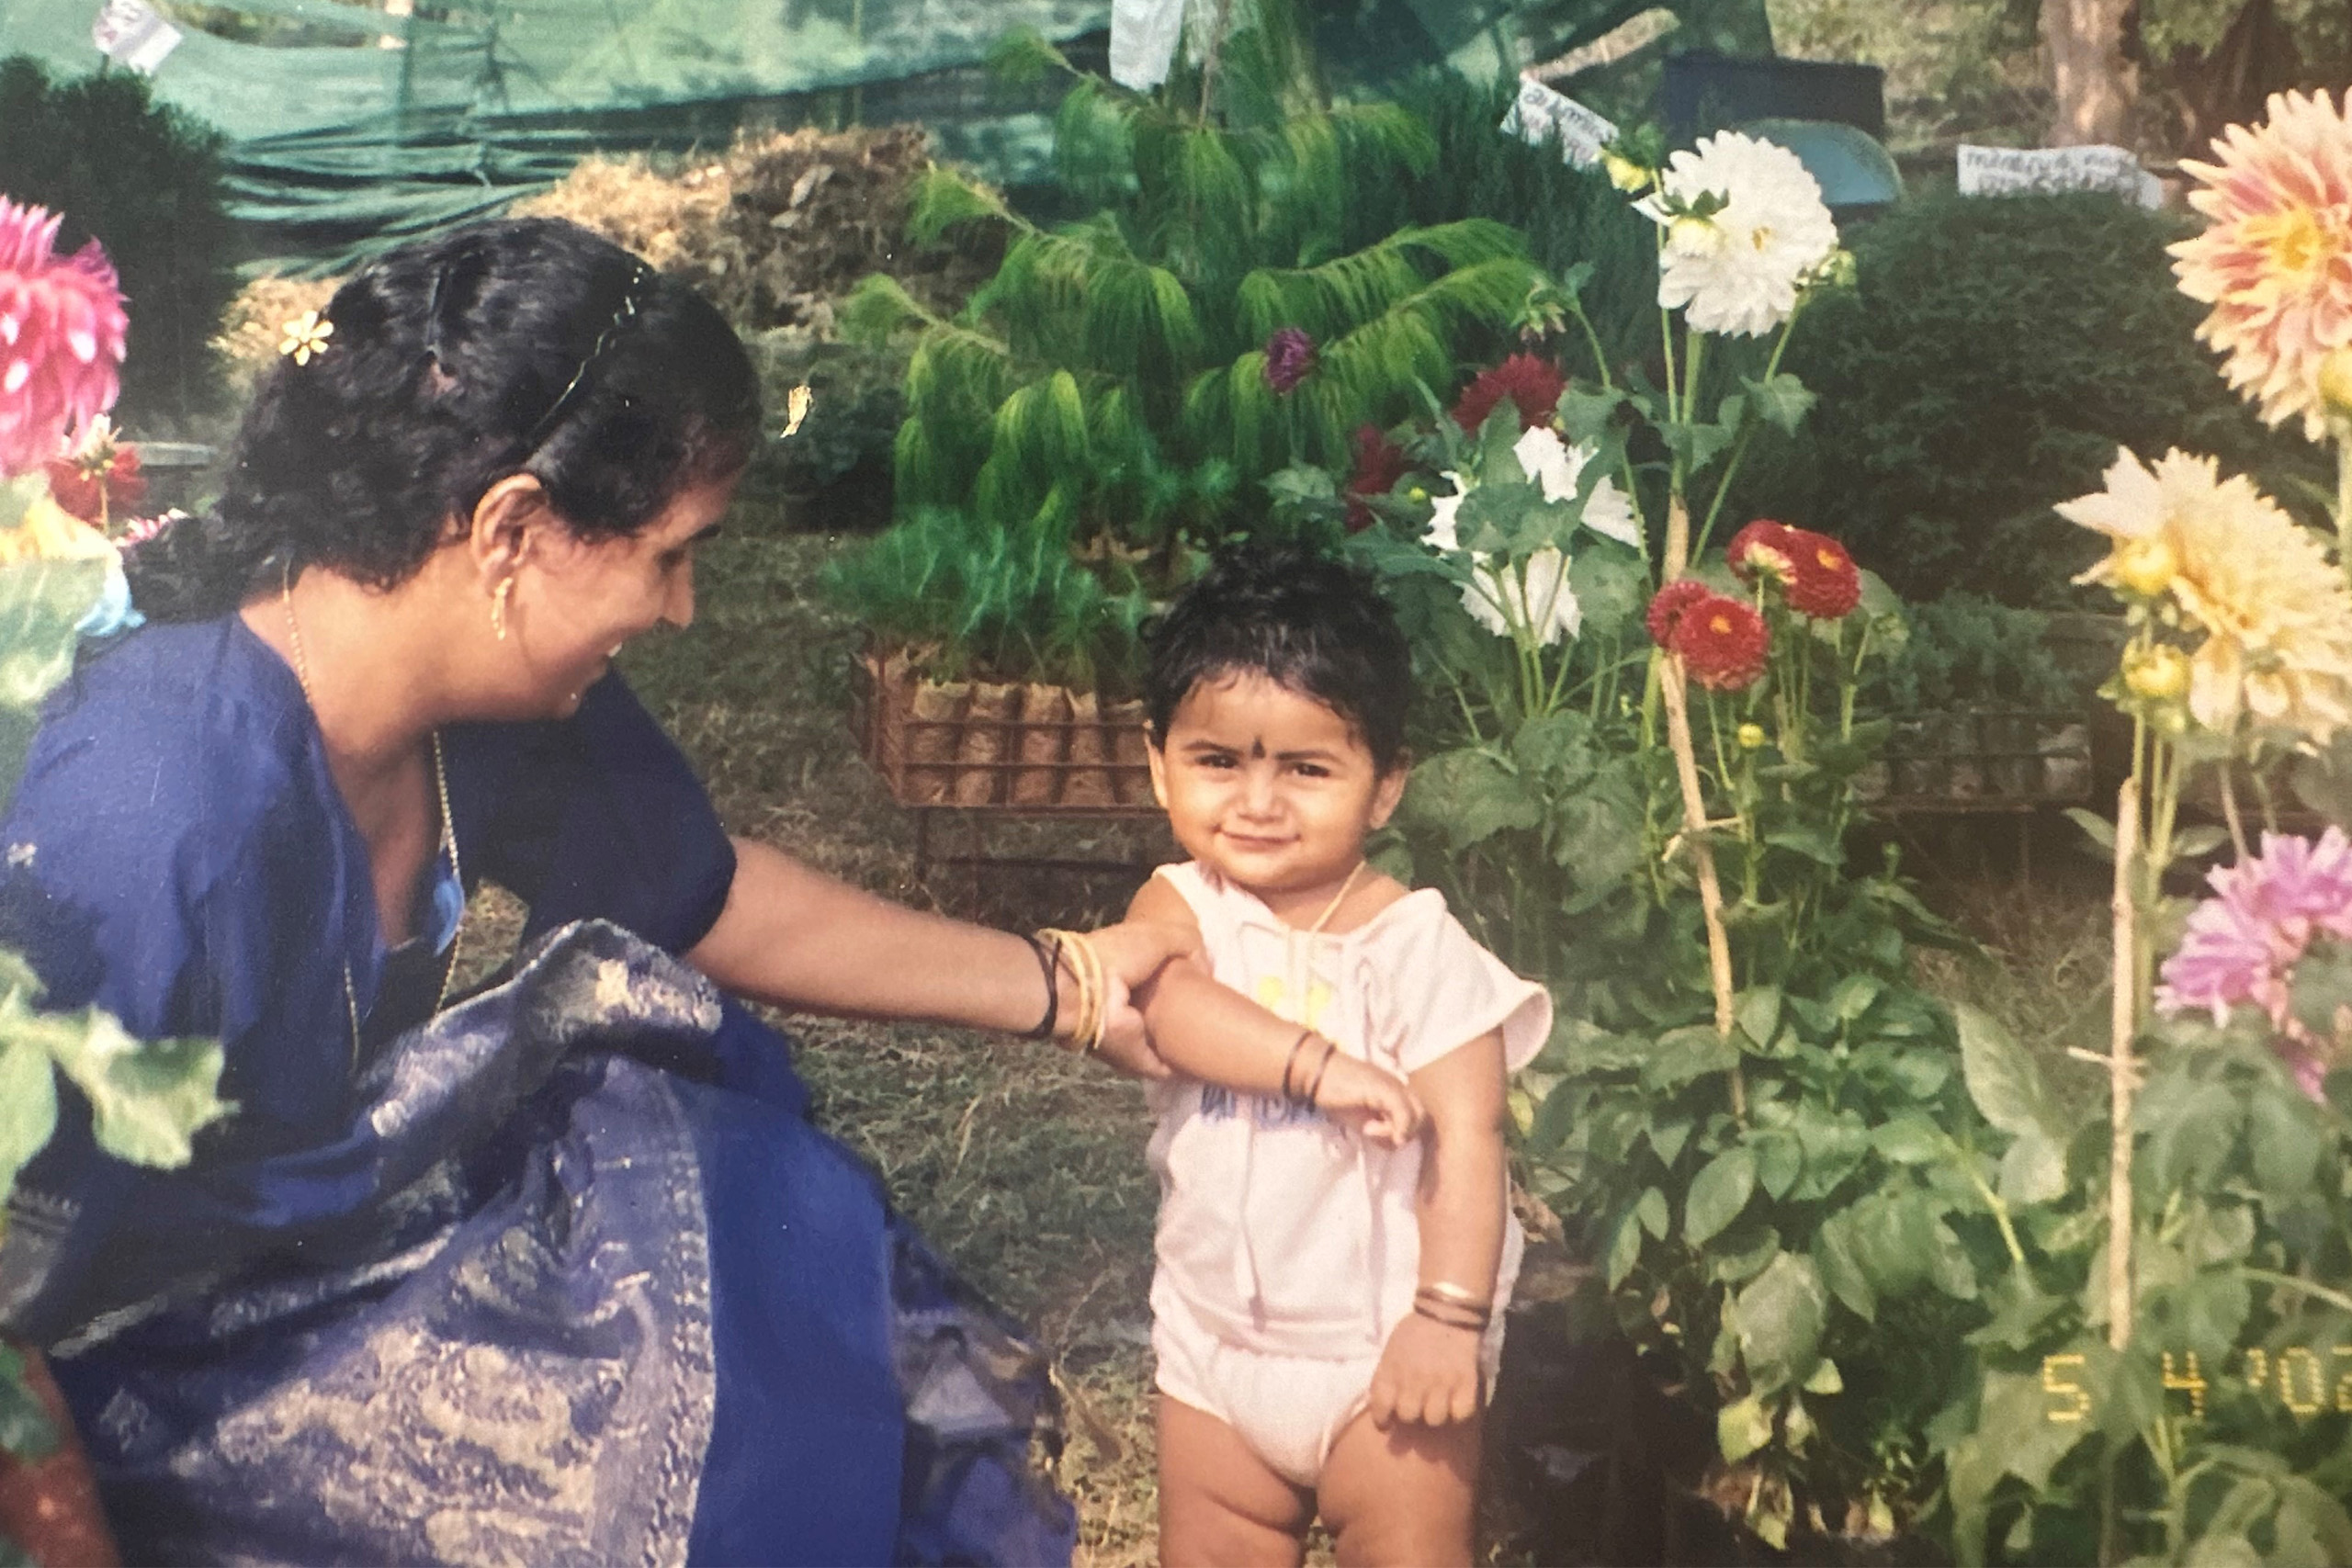 Jithu with his mother in India when he was a baby.